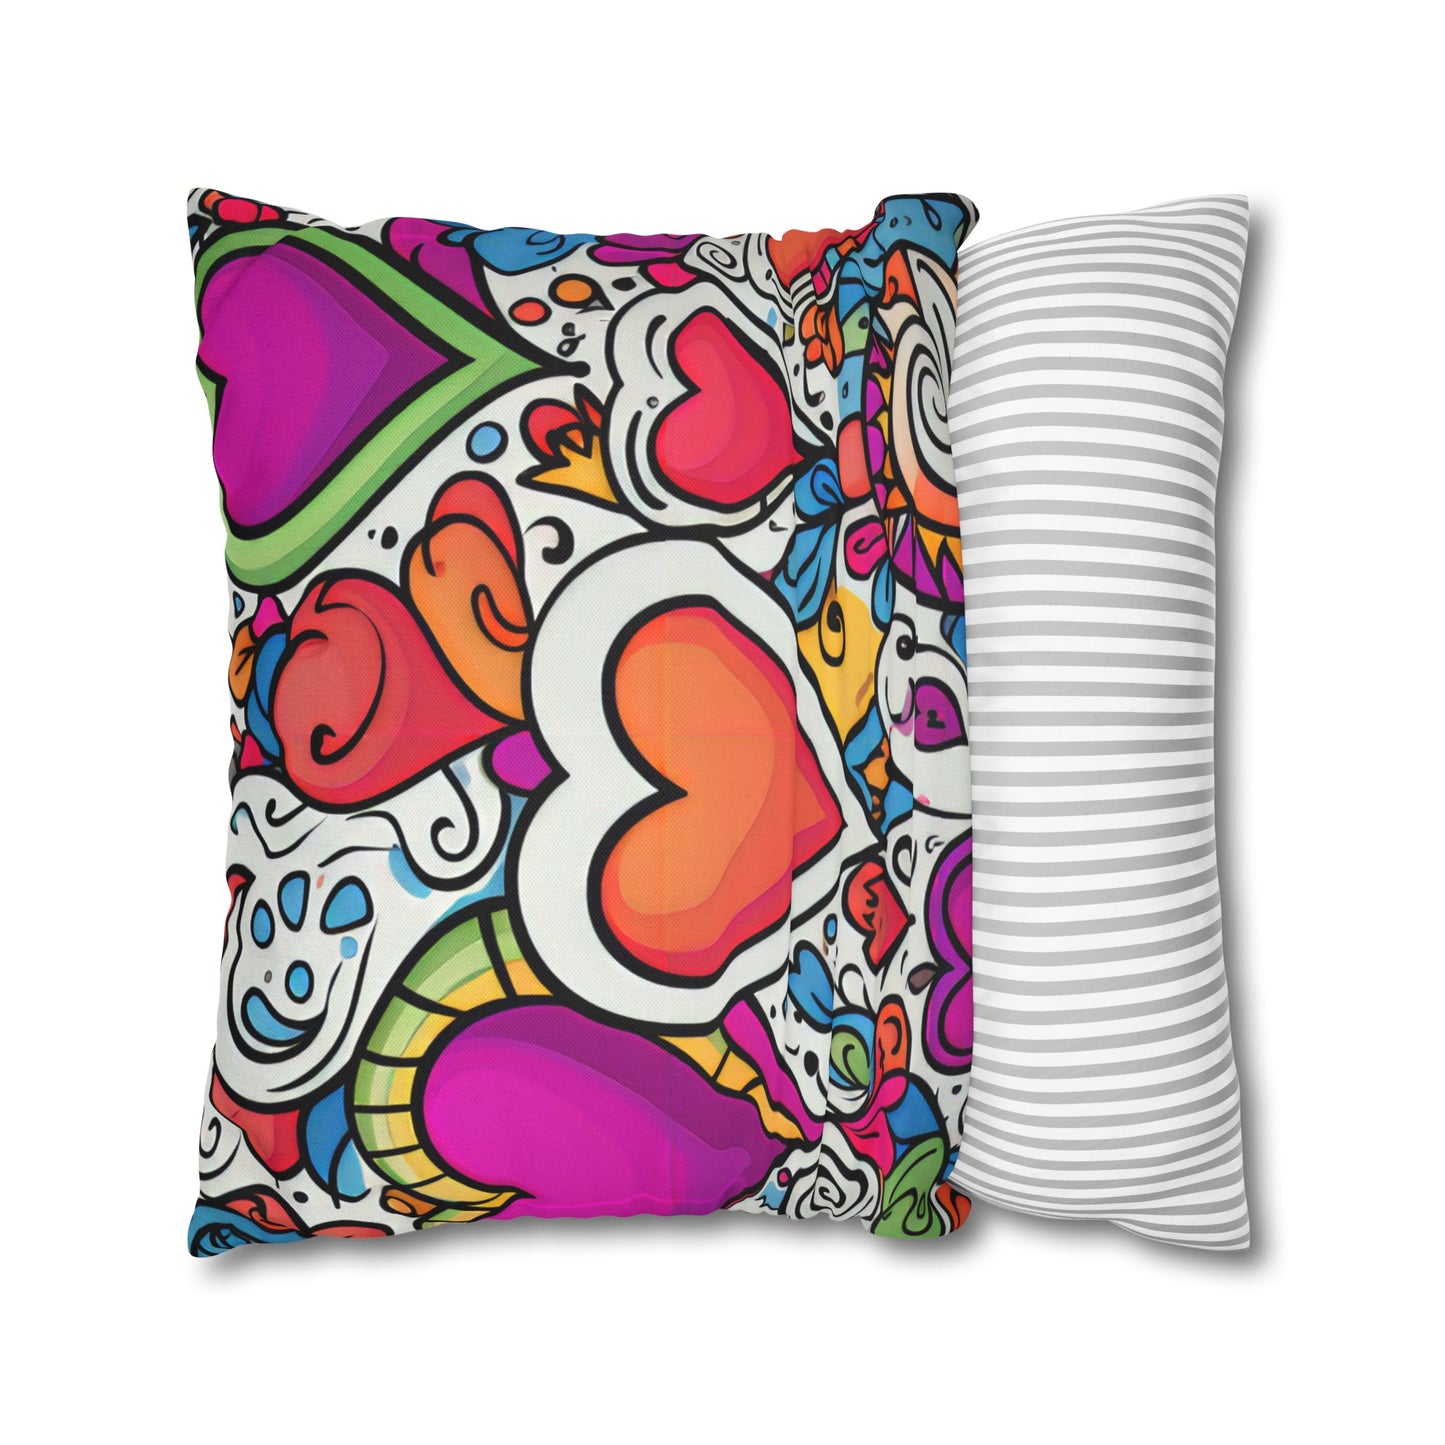 Field of Hearts Pillow Cover